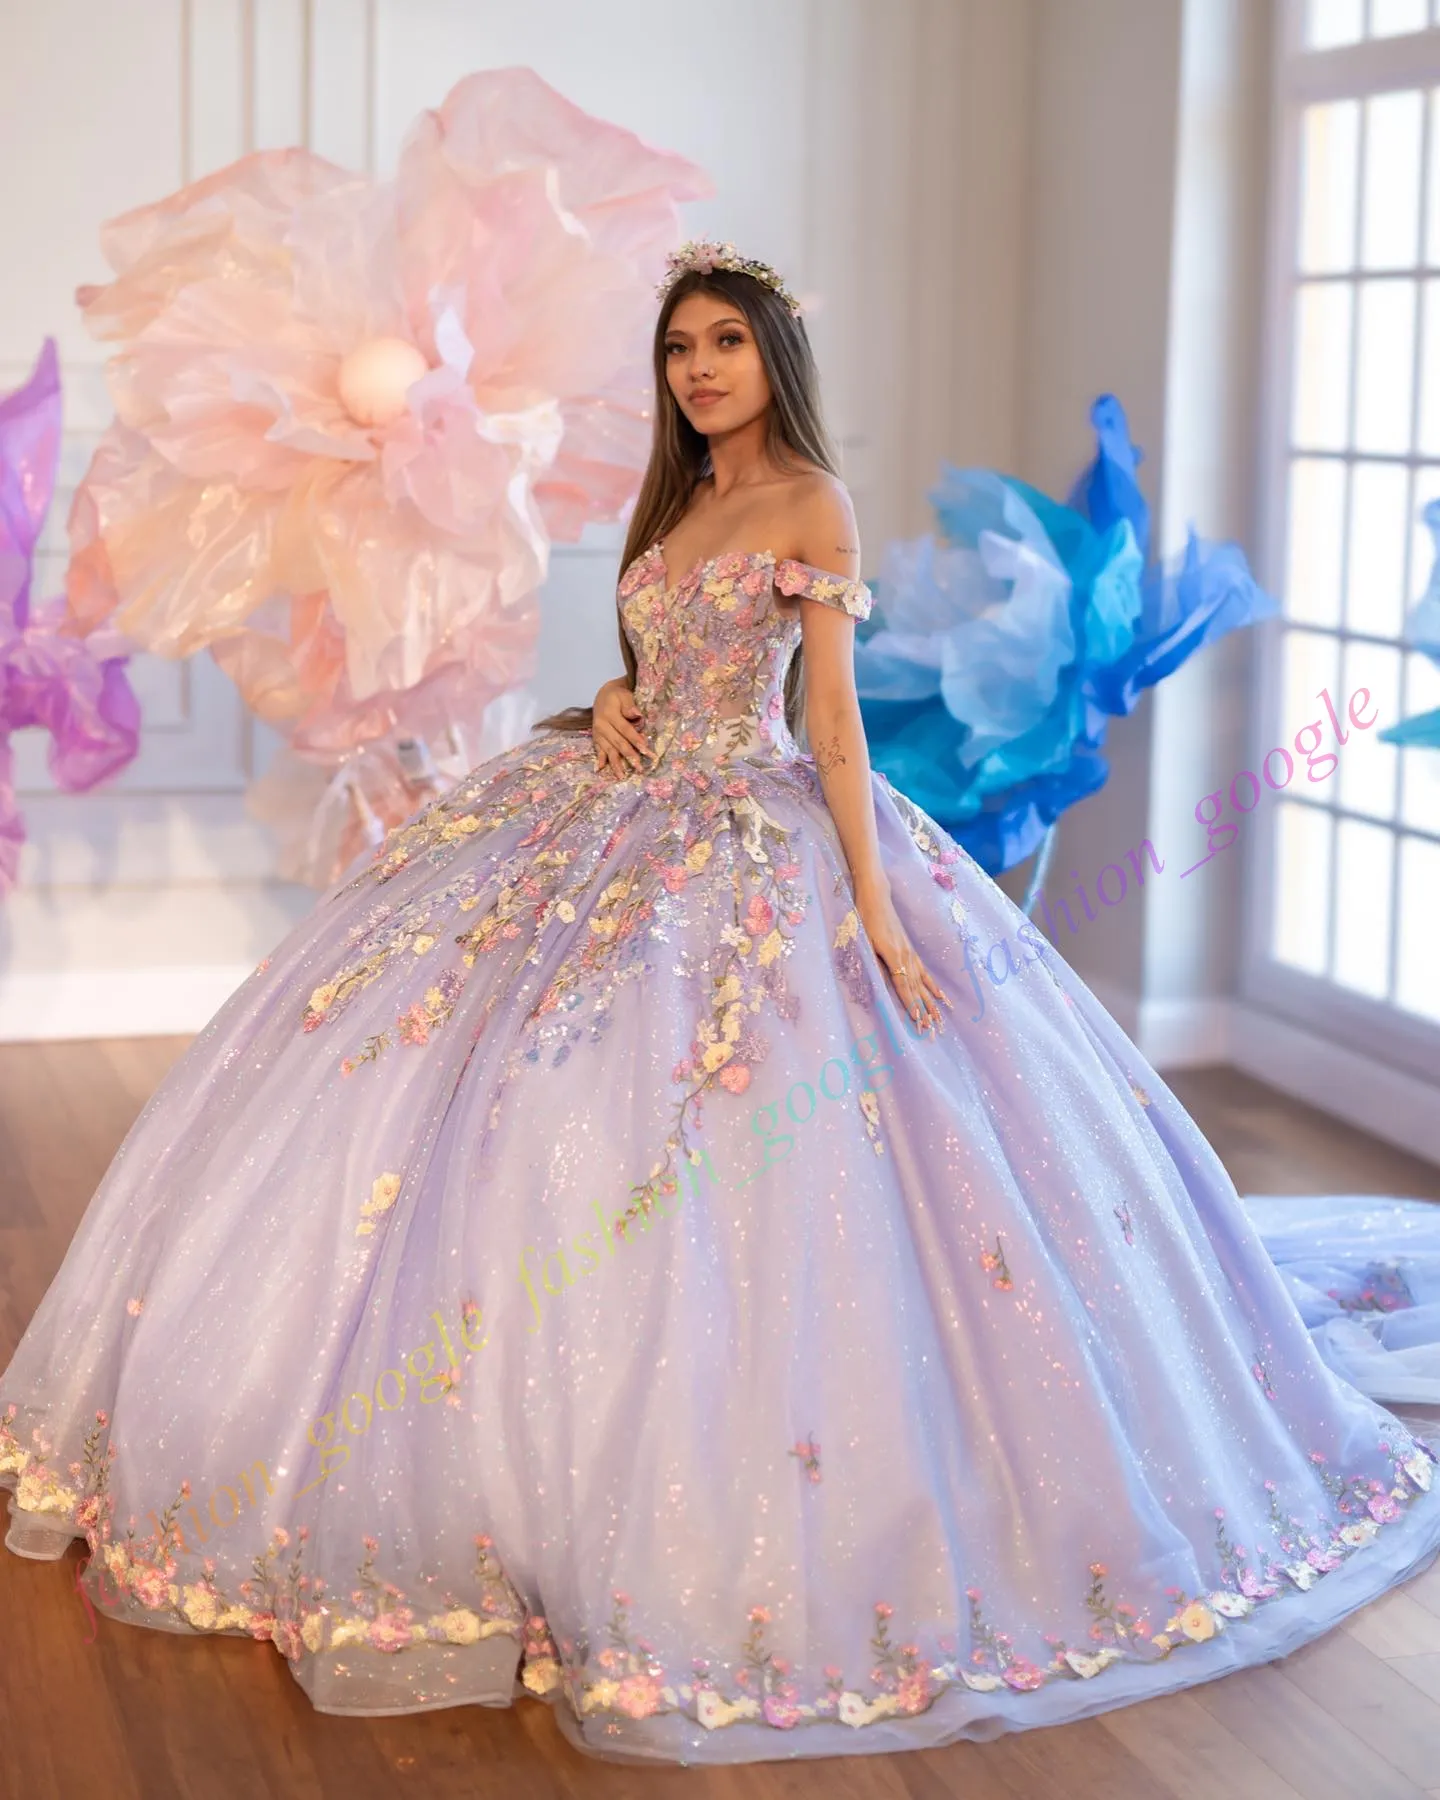 3D Floral Quinceanera Dress Sparkling Glitter Tulle Lace Applique Ball Mexican Quince Sweet 15/16 Birthday Party Gown for 15th Girl Drama Winter Formal Prom Gala